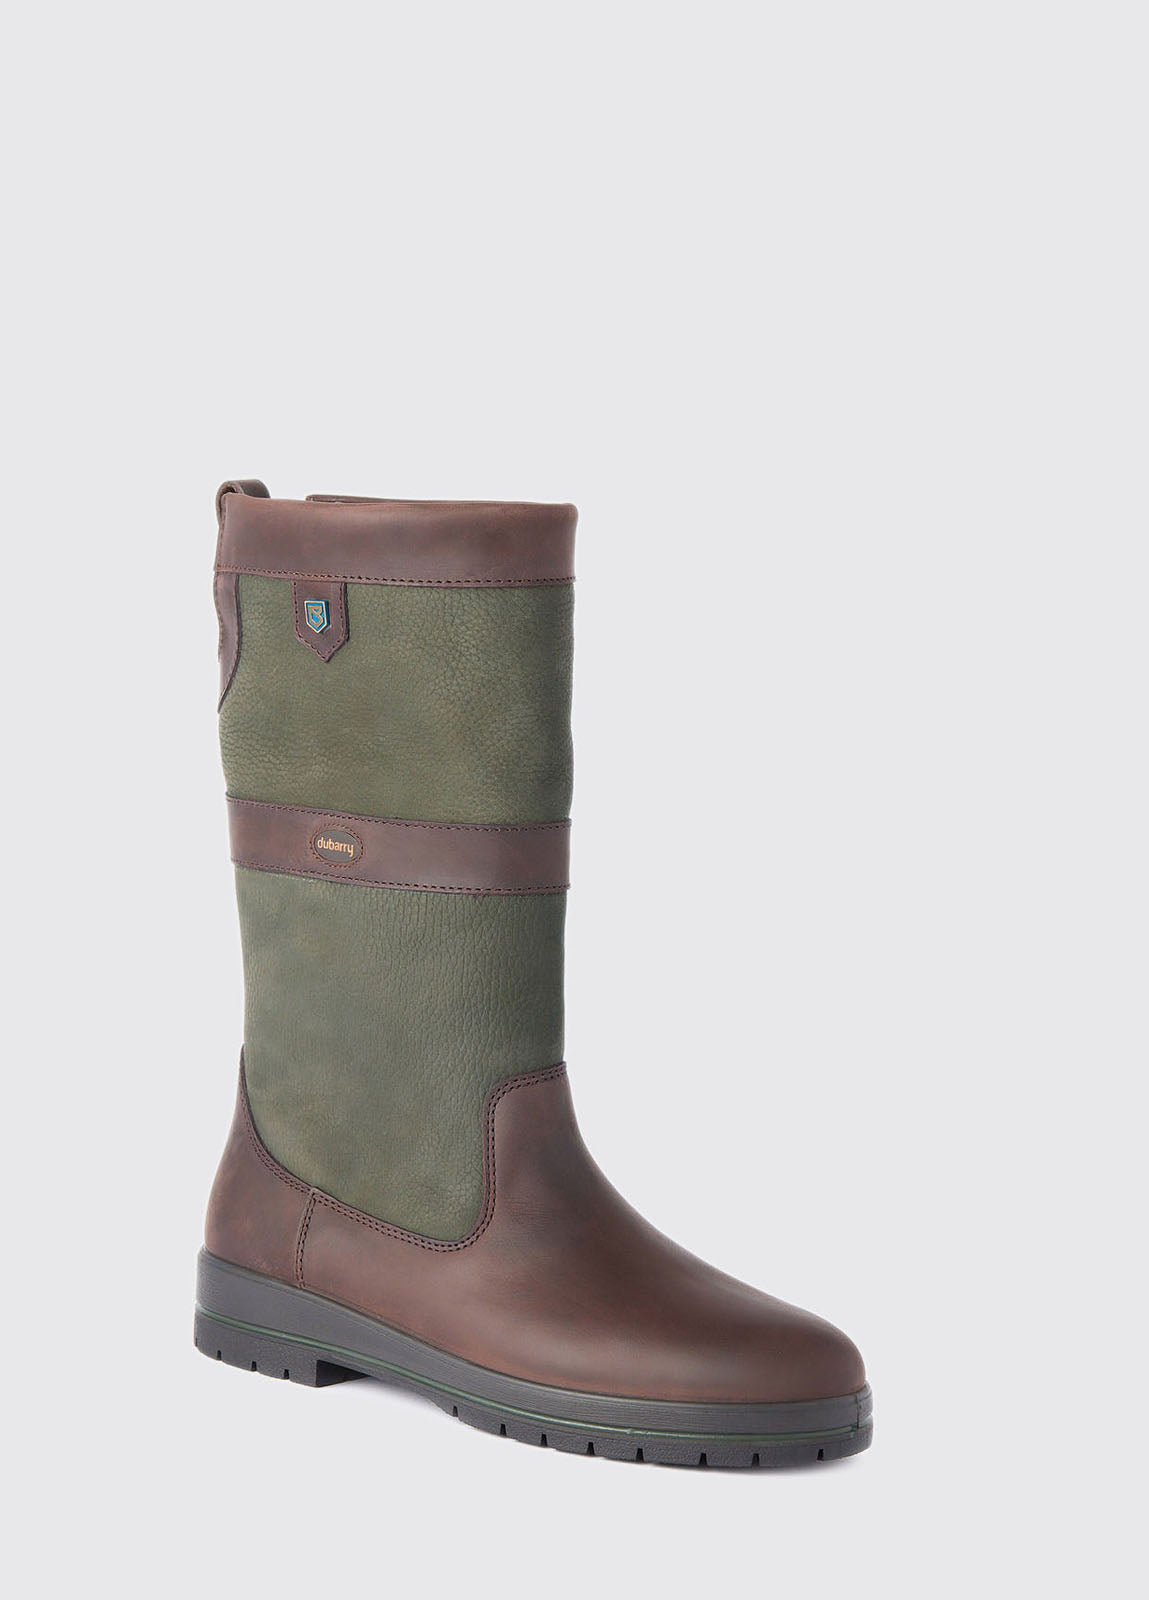 Dubarry Womens Kildare Country Boot - Ivy